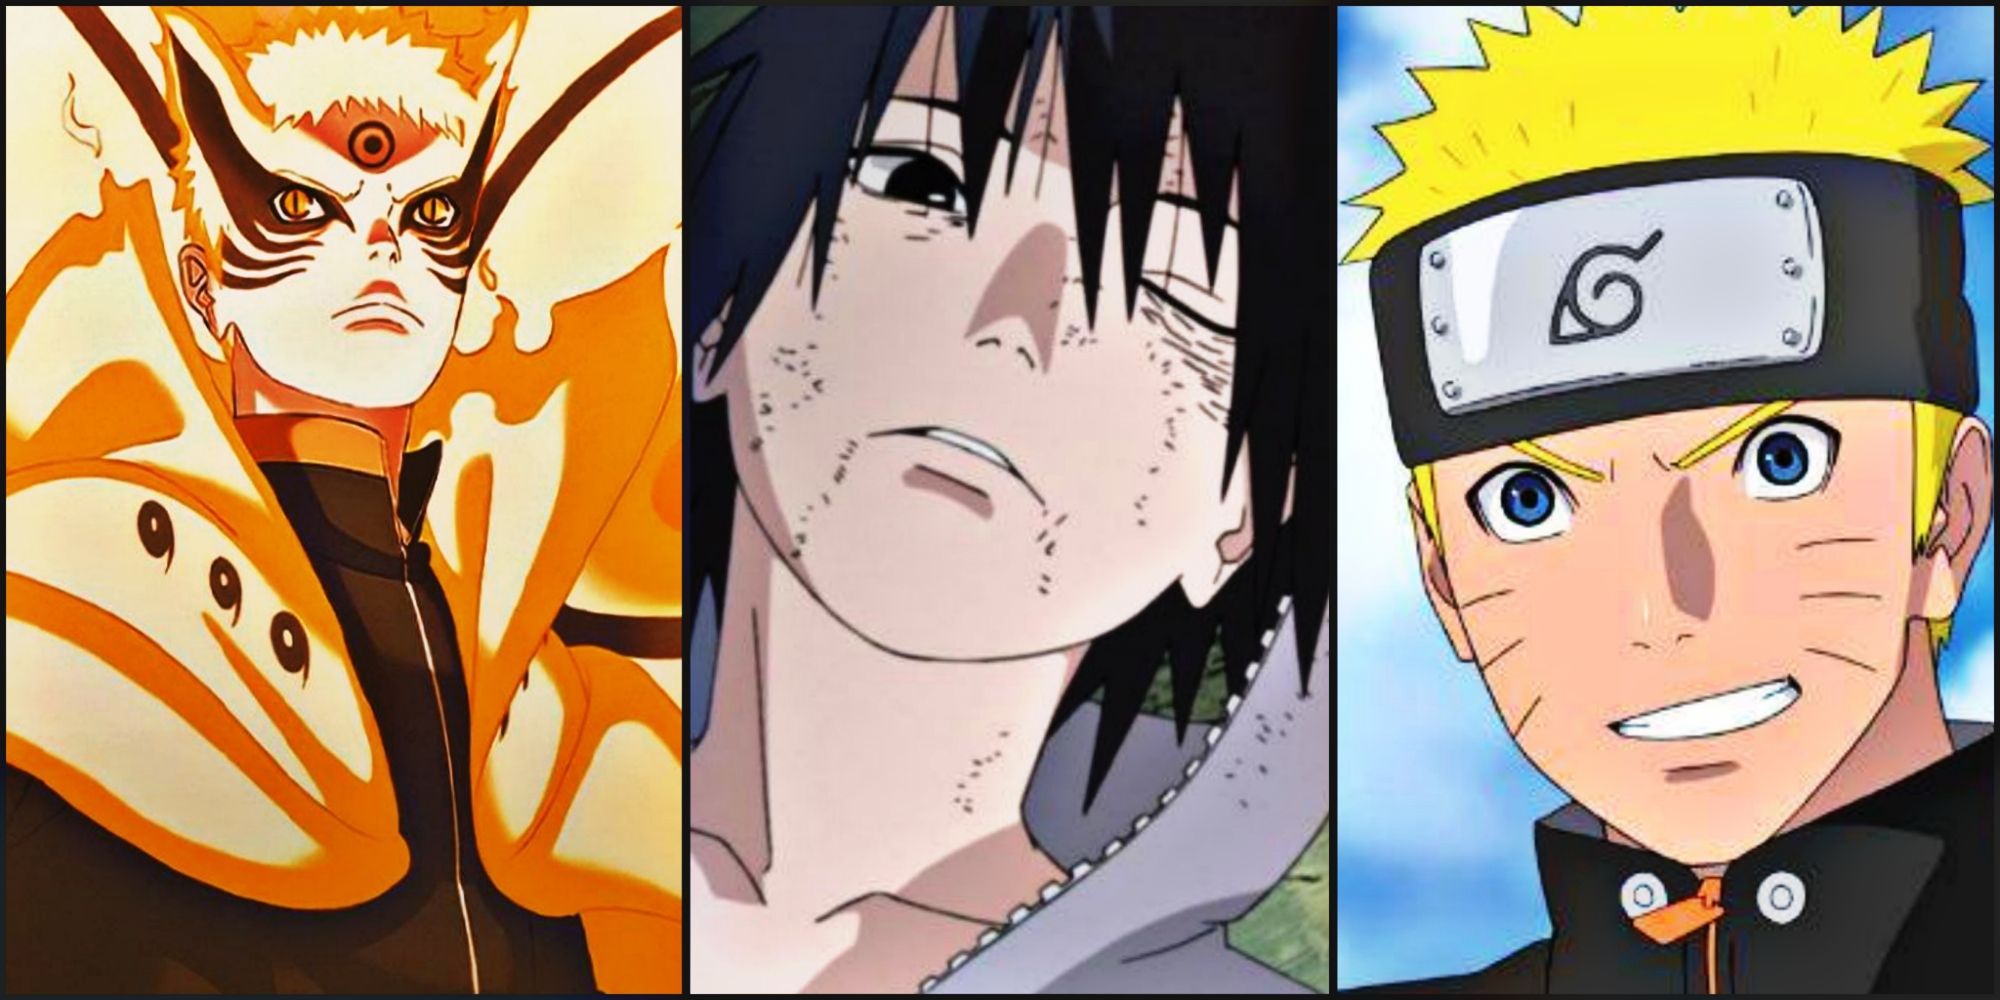 andy ruch share pictures of sasuke and naruto photos